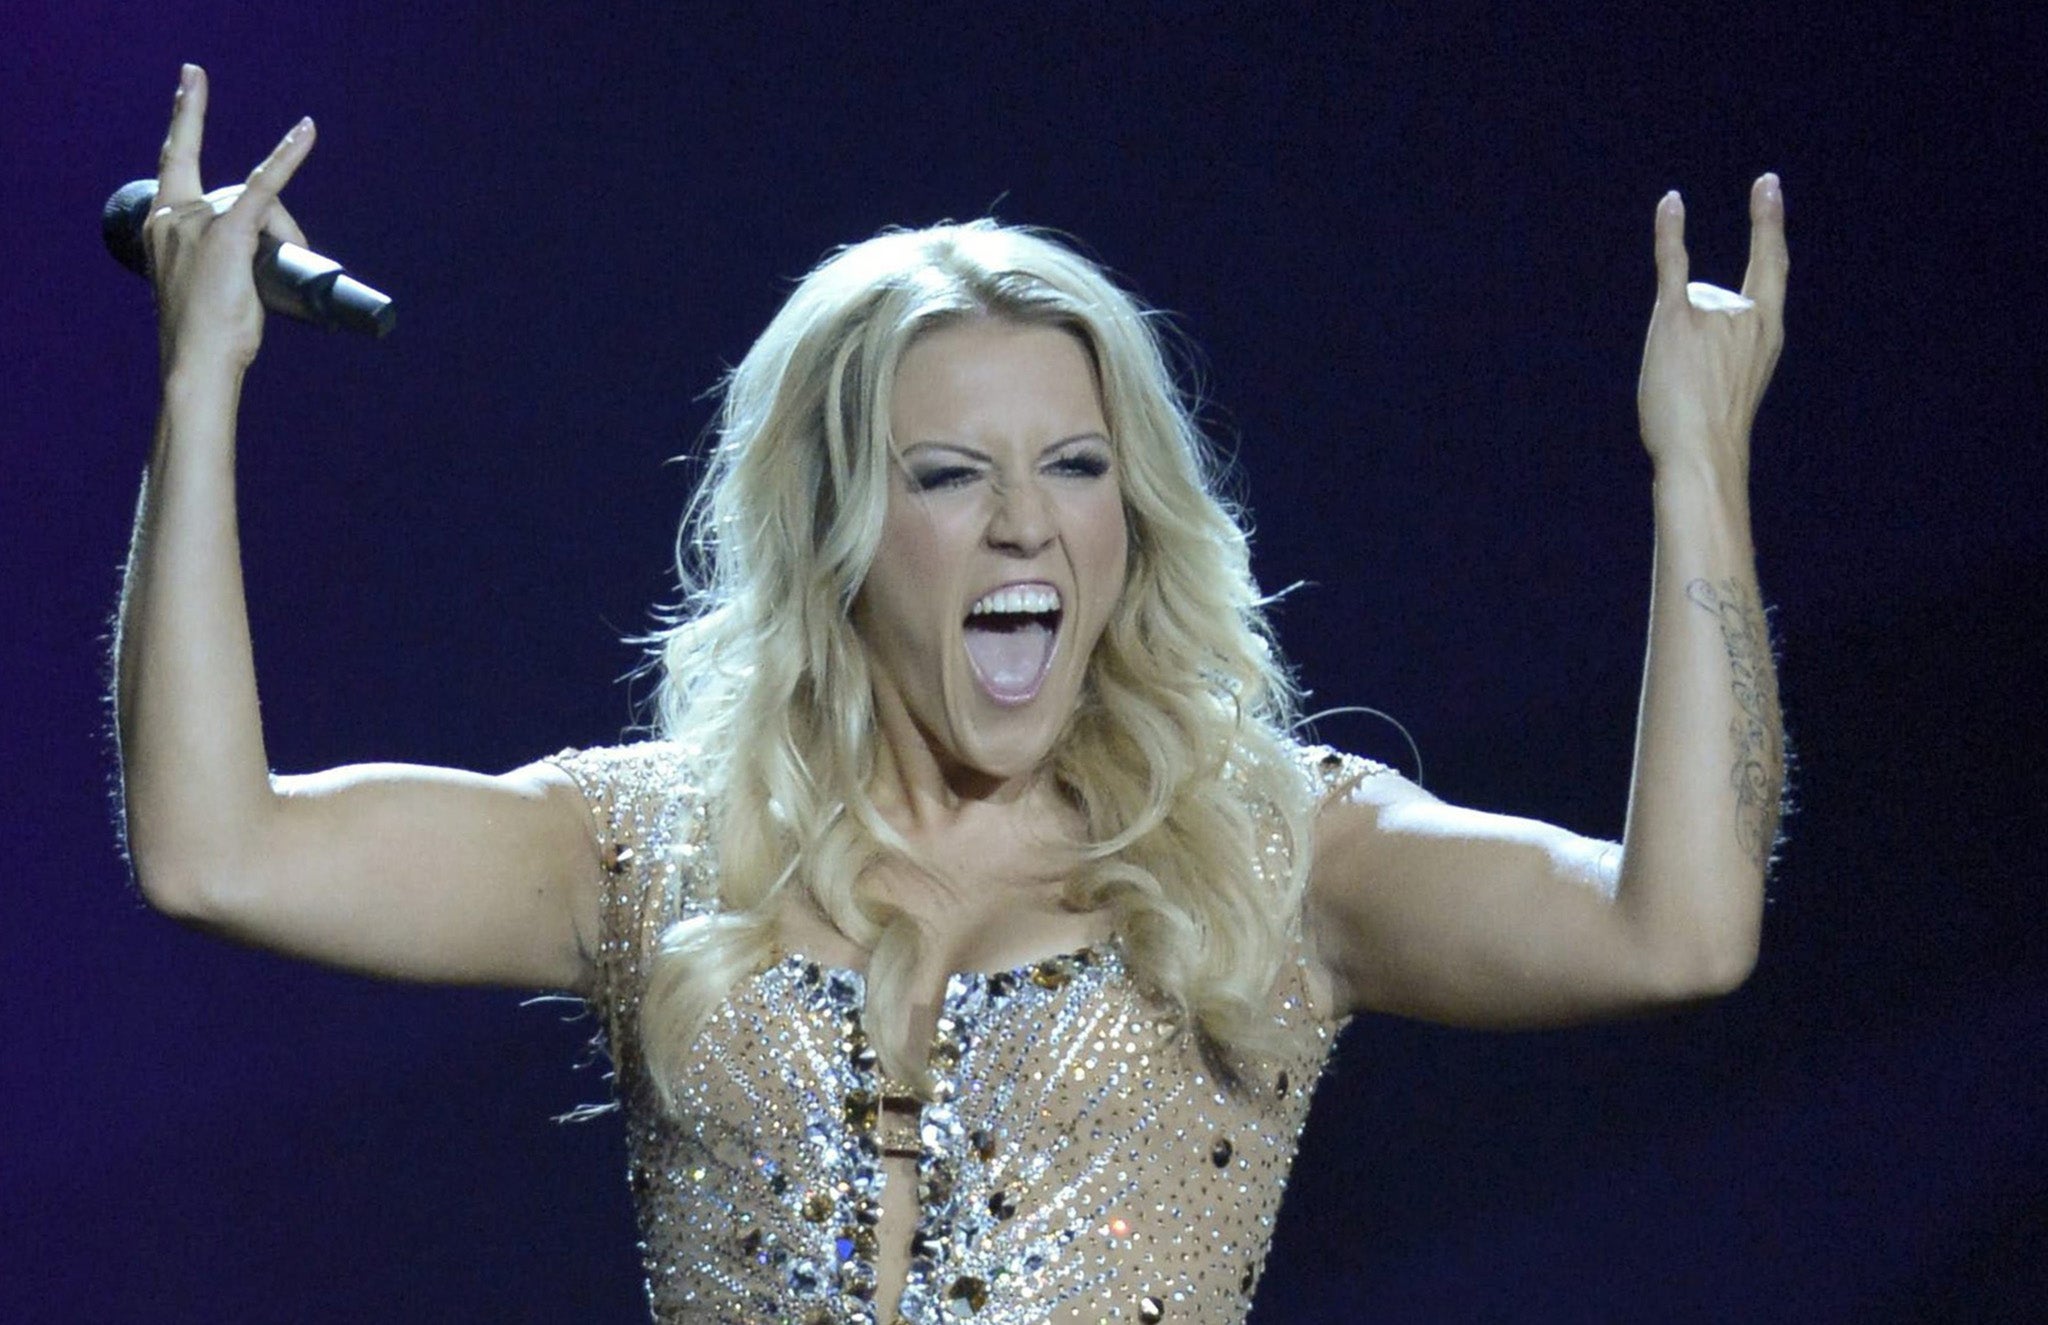 Germany: Cascada performing 'Glorious' Cascada has had a decade of success global hits including "The Rhythm of The Night" and "Summer Of Love". Singer Natalie Horler is the daughter of acclaimed jazz musician David Horler. German songwriters an